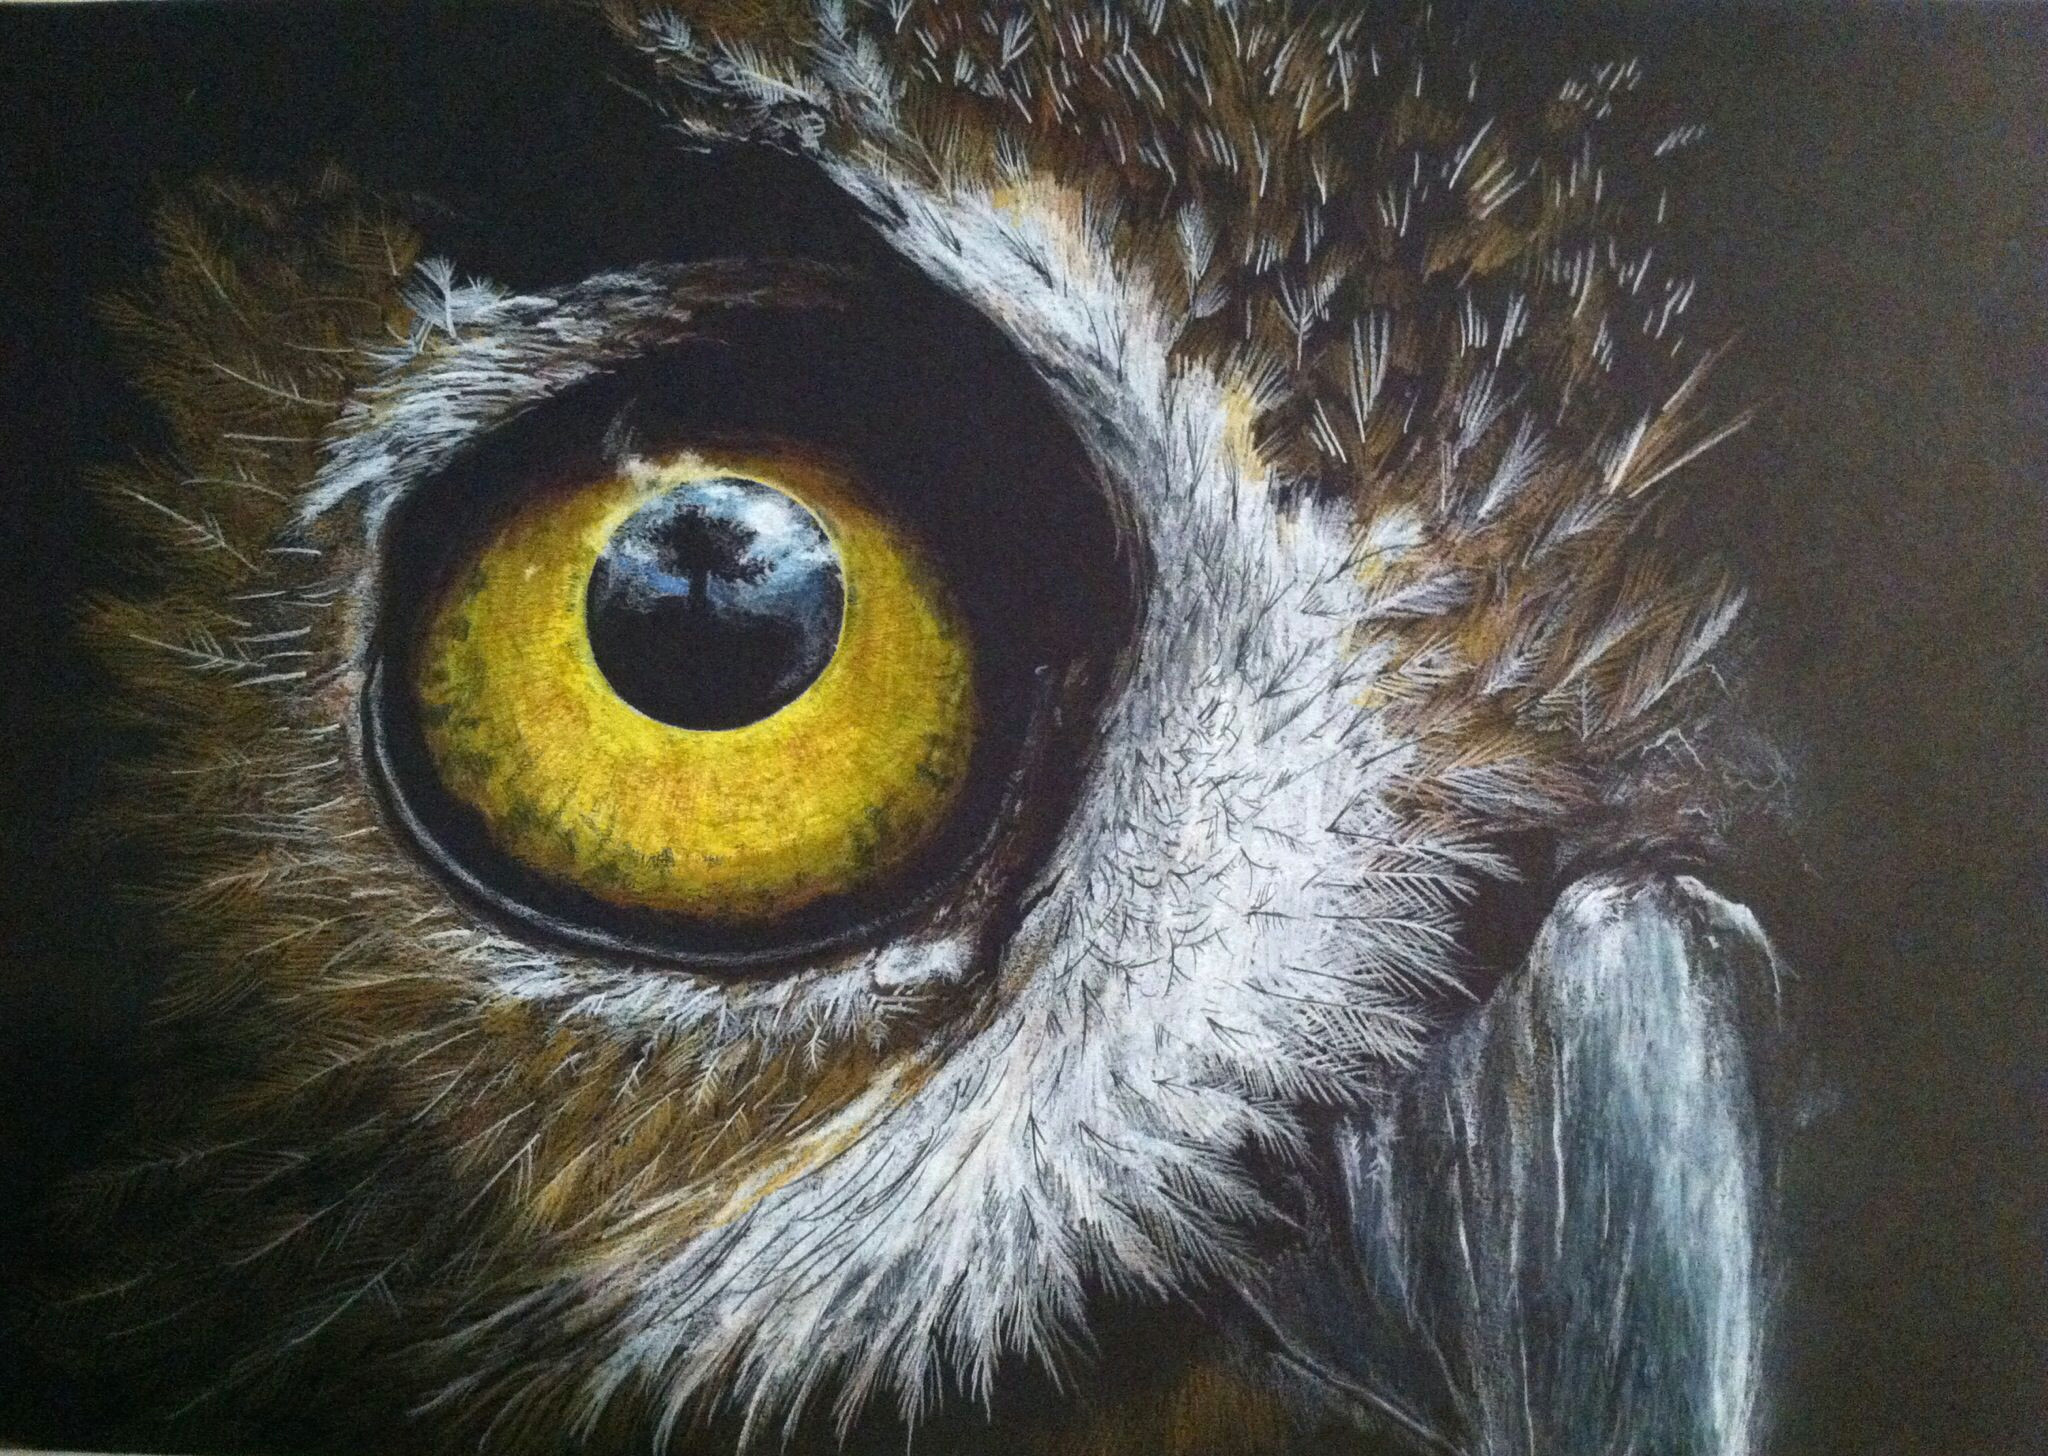 Drawing An Owl Eye Colored Pencil On Black Paper Entitled Eye Of the Owl Art I